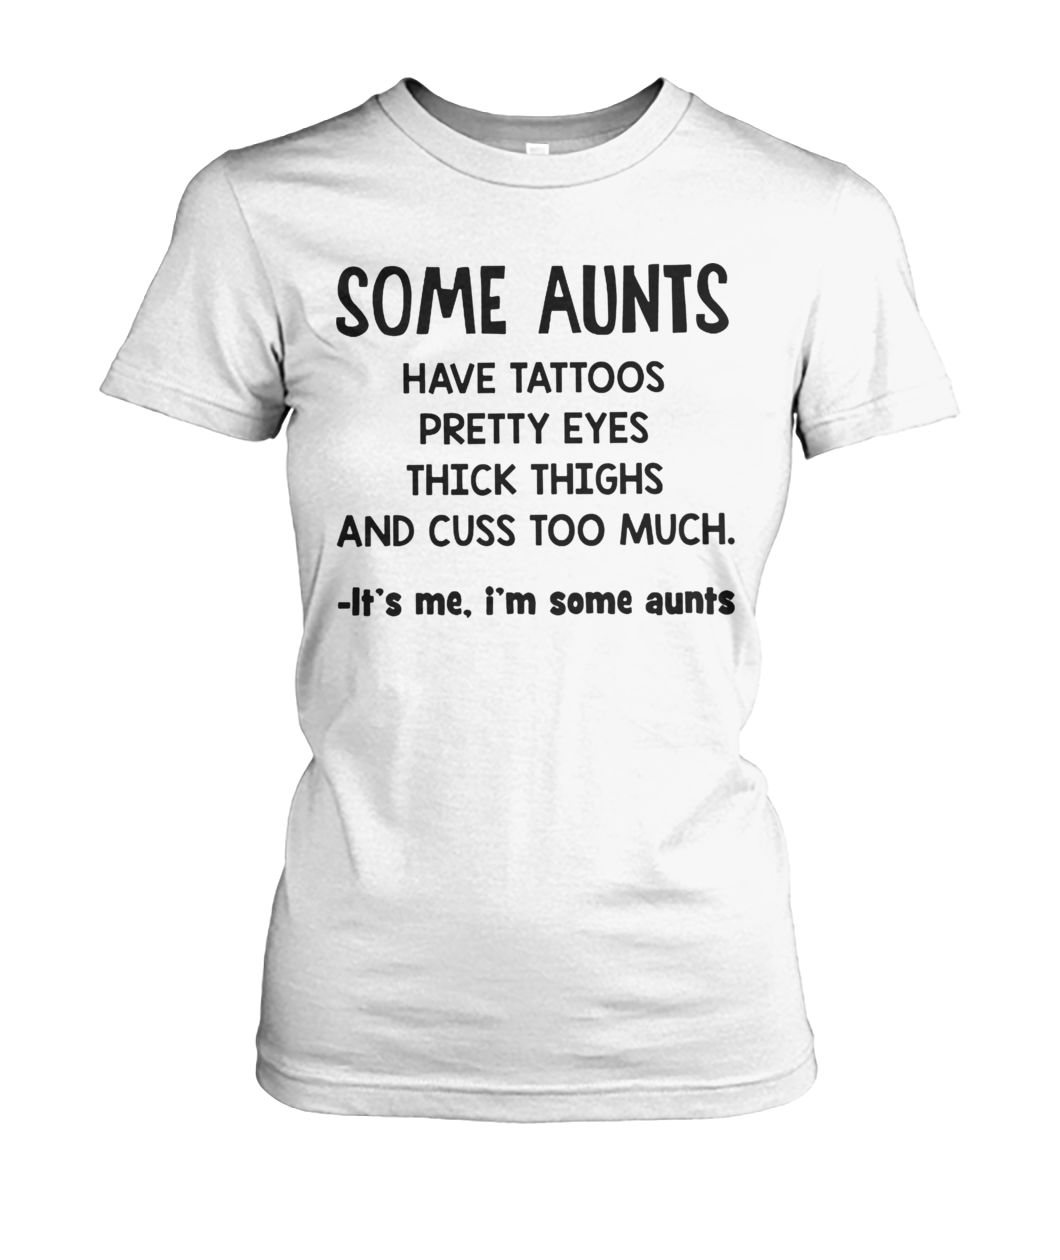 Some aunts have tattoos pretty eyes thick thighs and cuss to much women's crew tee